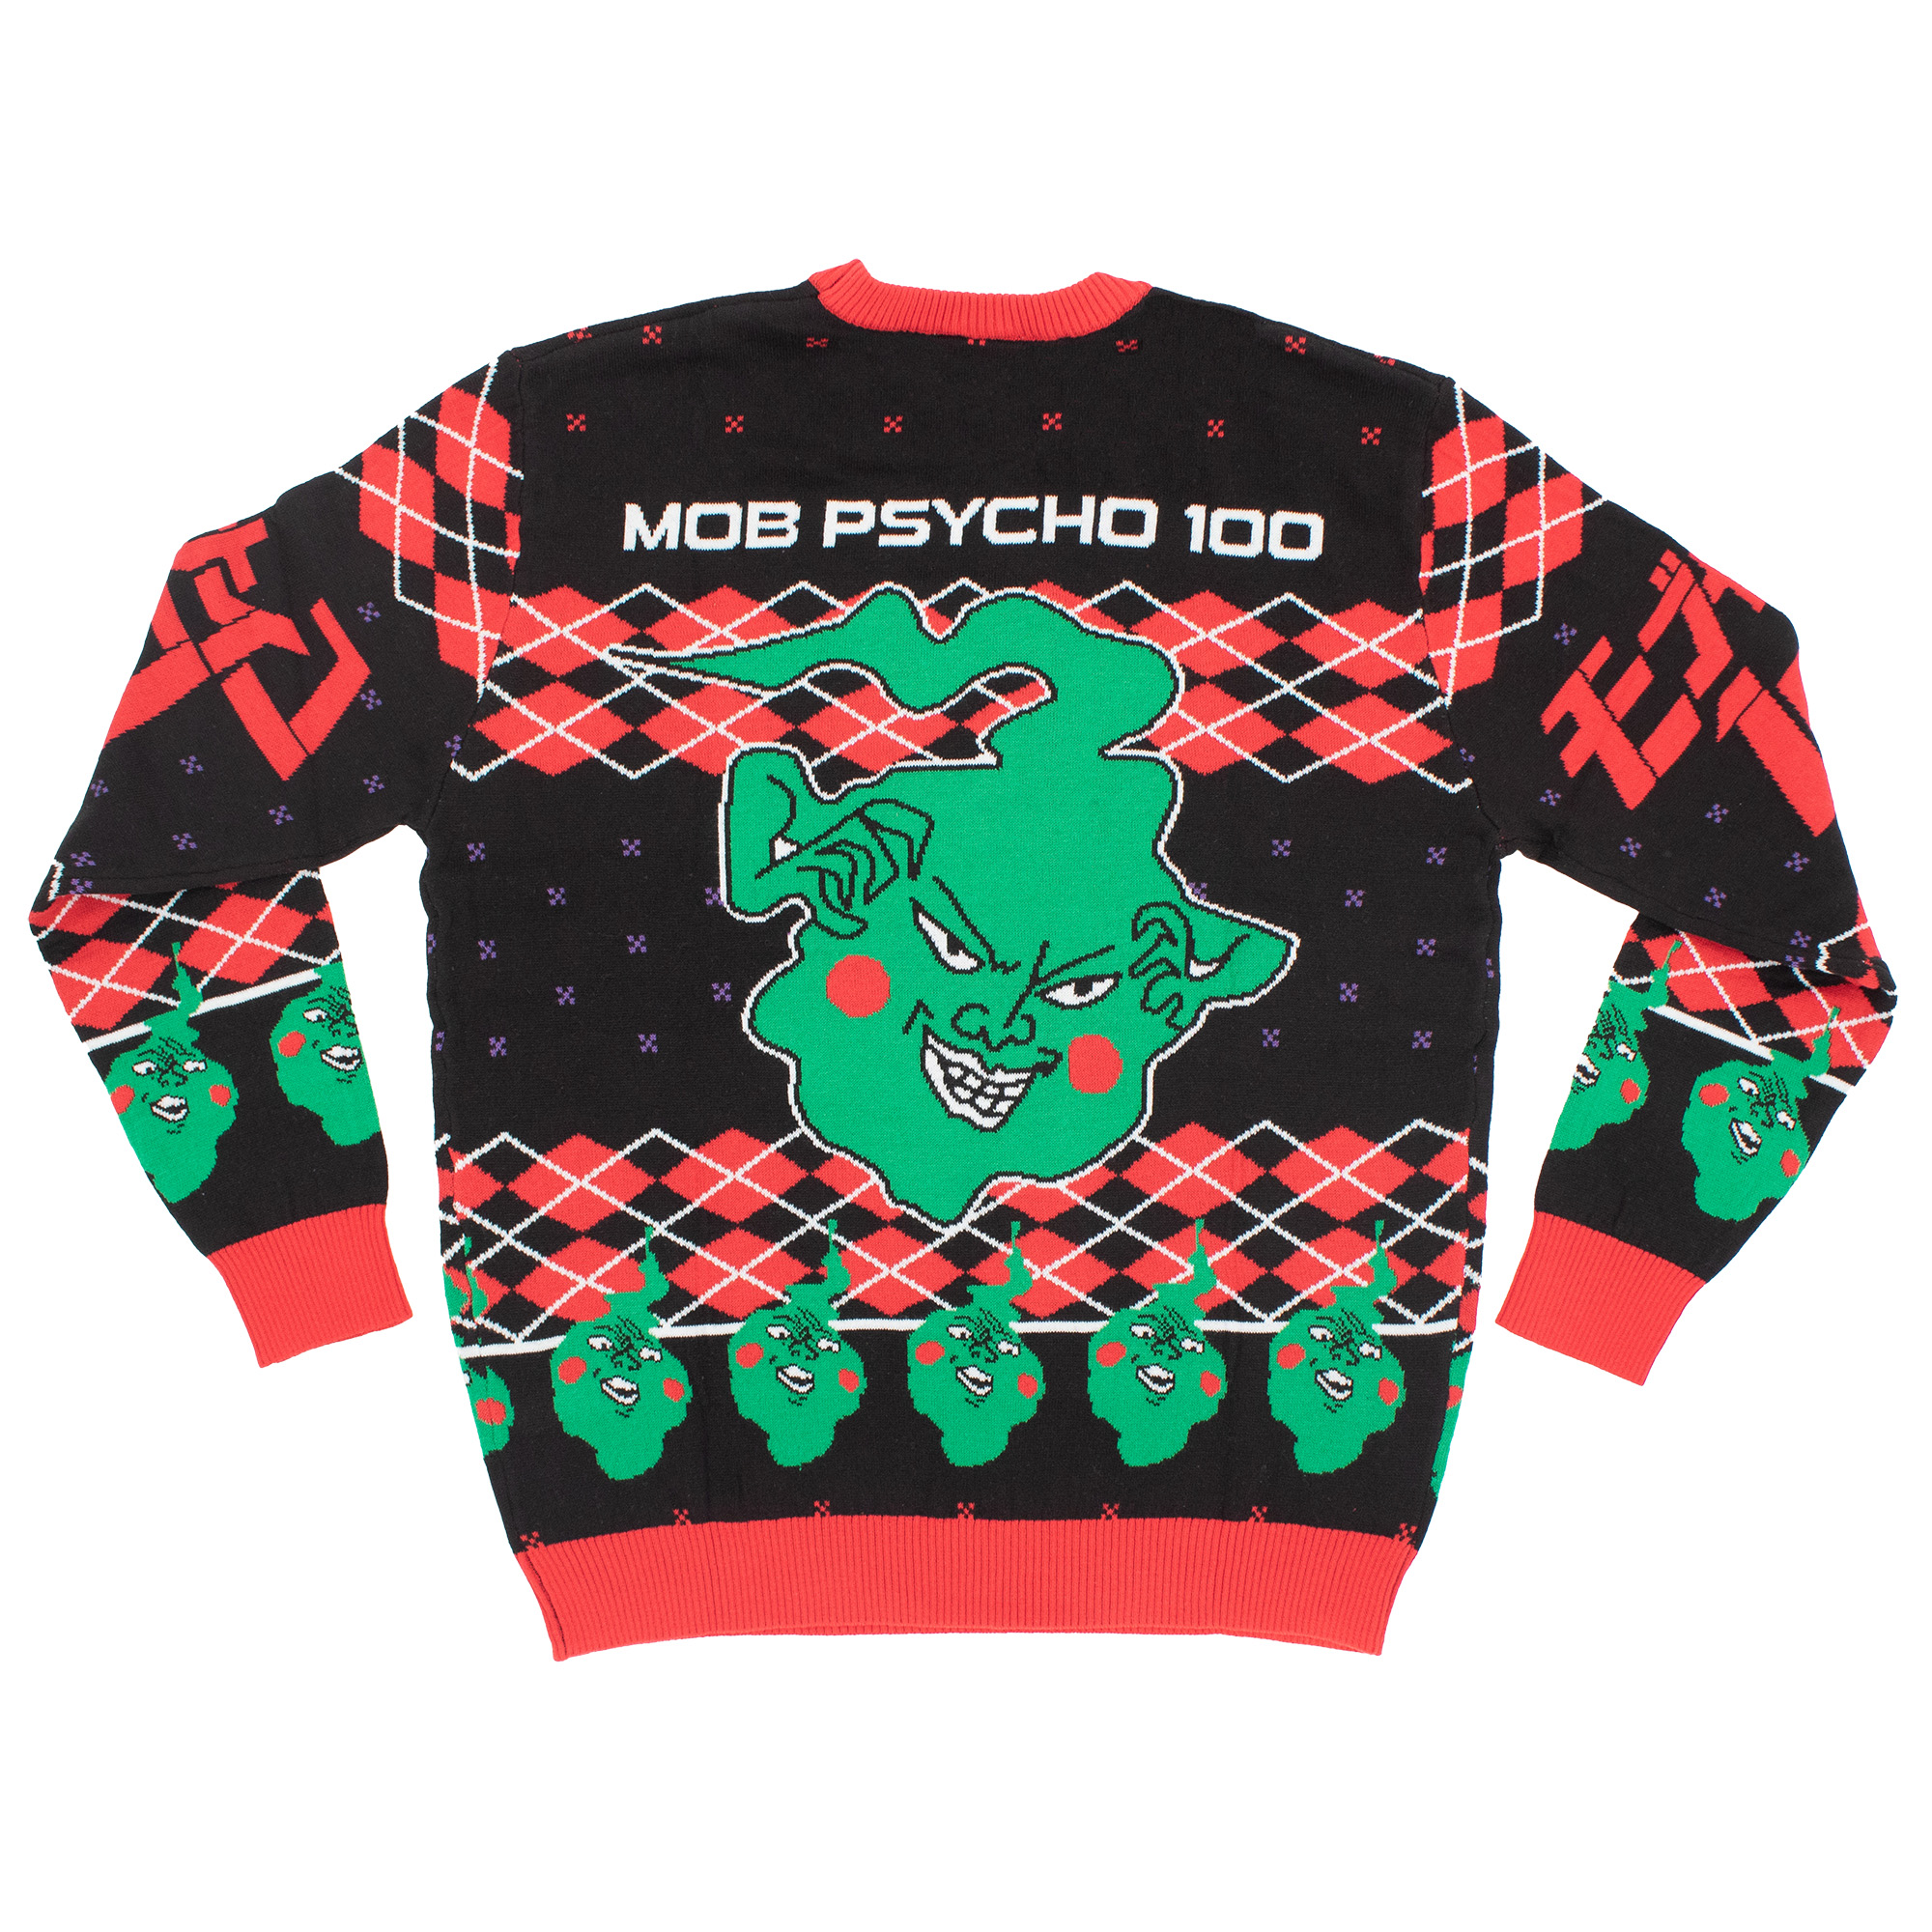 Mob Psycho 100 - Mob and Dimple Holiday Sweater image count 1